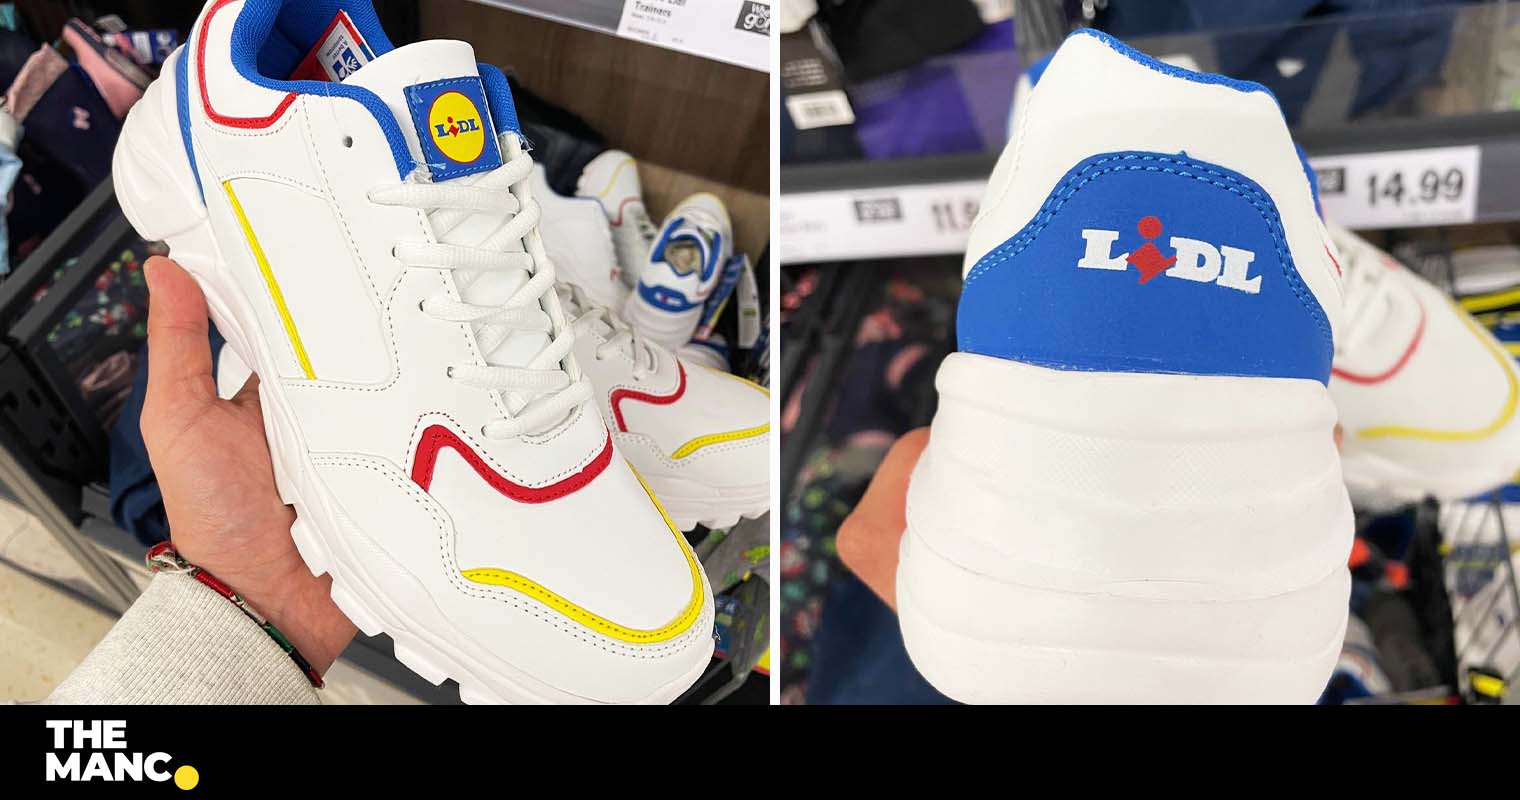 Lidl's iconic trainers have been spotted back in Manchester stores